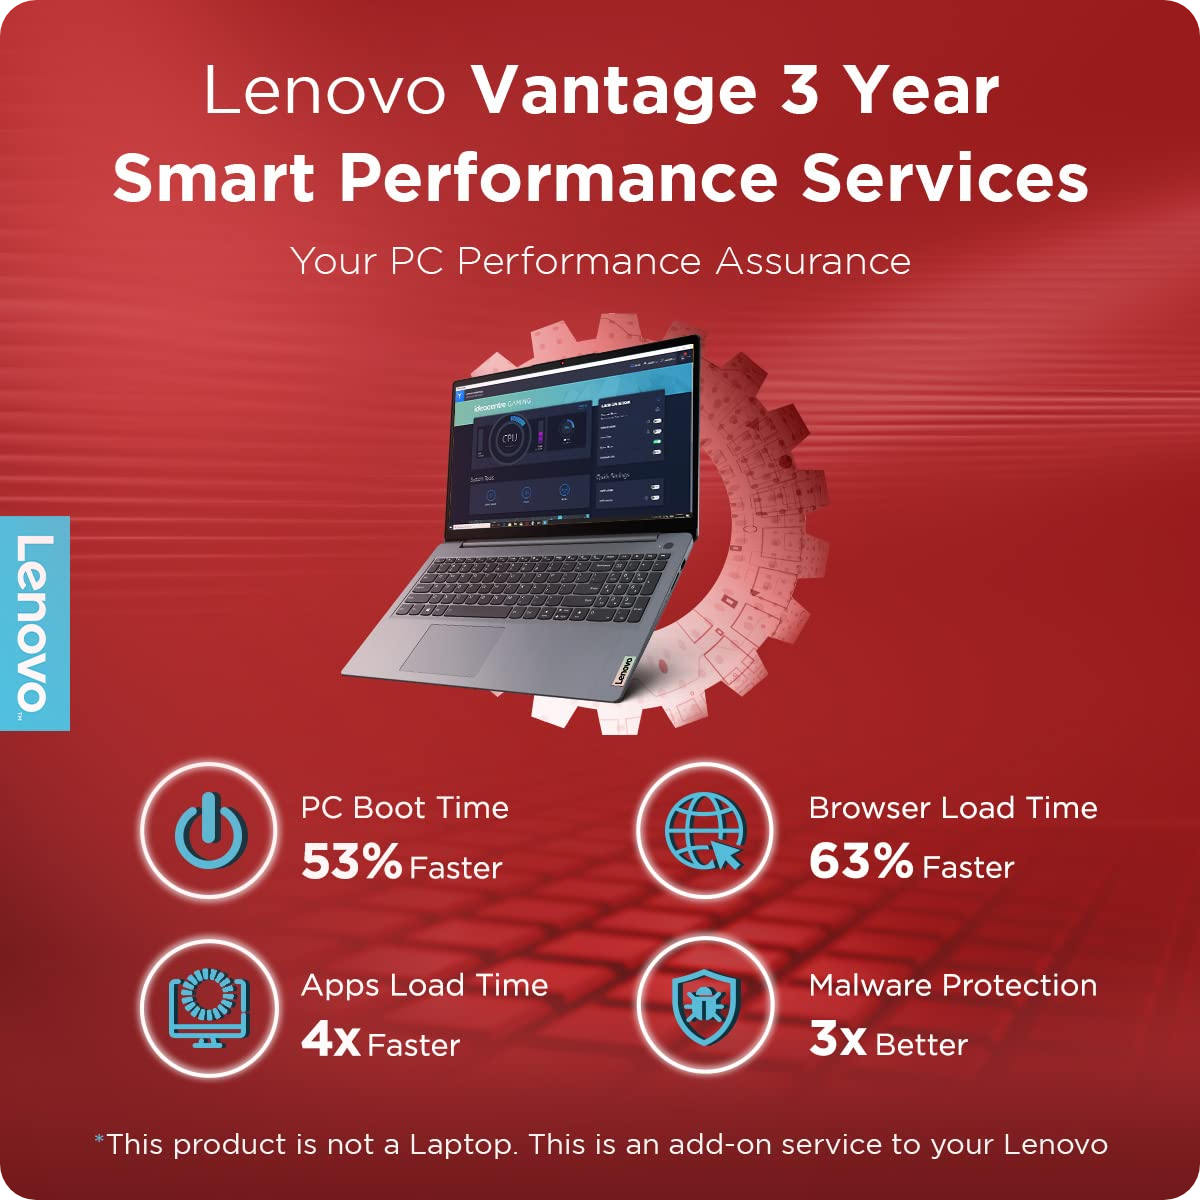 Alt text- An image showcasing "Lenovo Vantage", an app The app makes it easier for Lenovo users to manage device settings, run diagnostics, update drivers, and enhance their PCs.